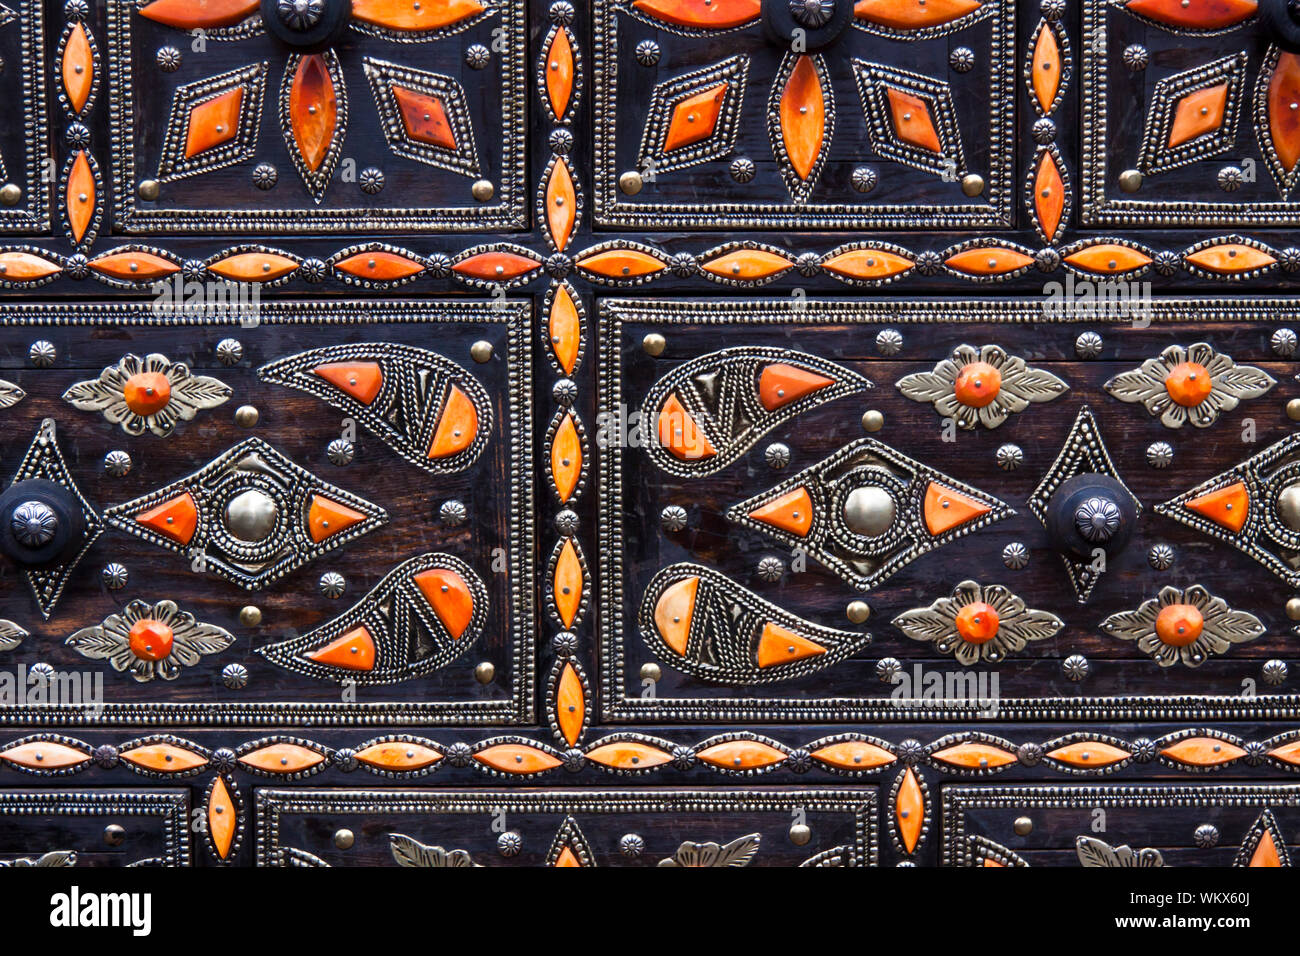 Old morrocan jewel case as they are sold at their souks. Stock Photo